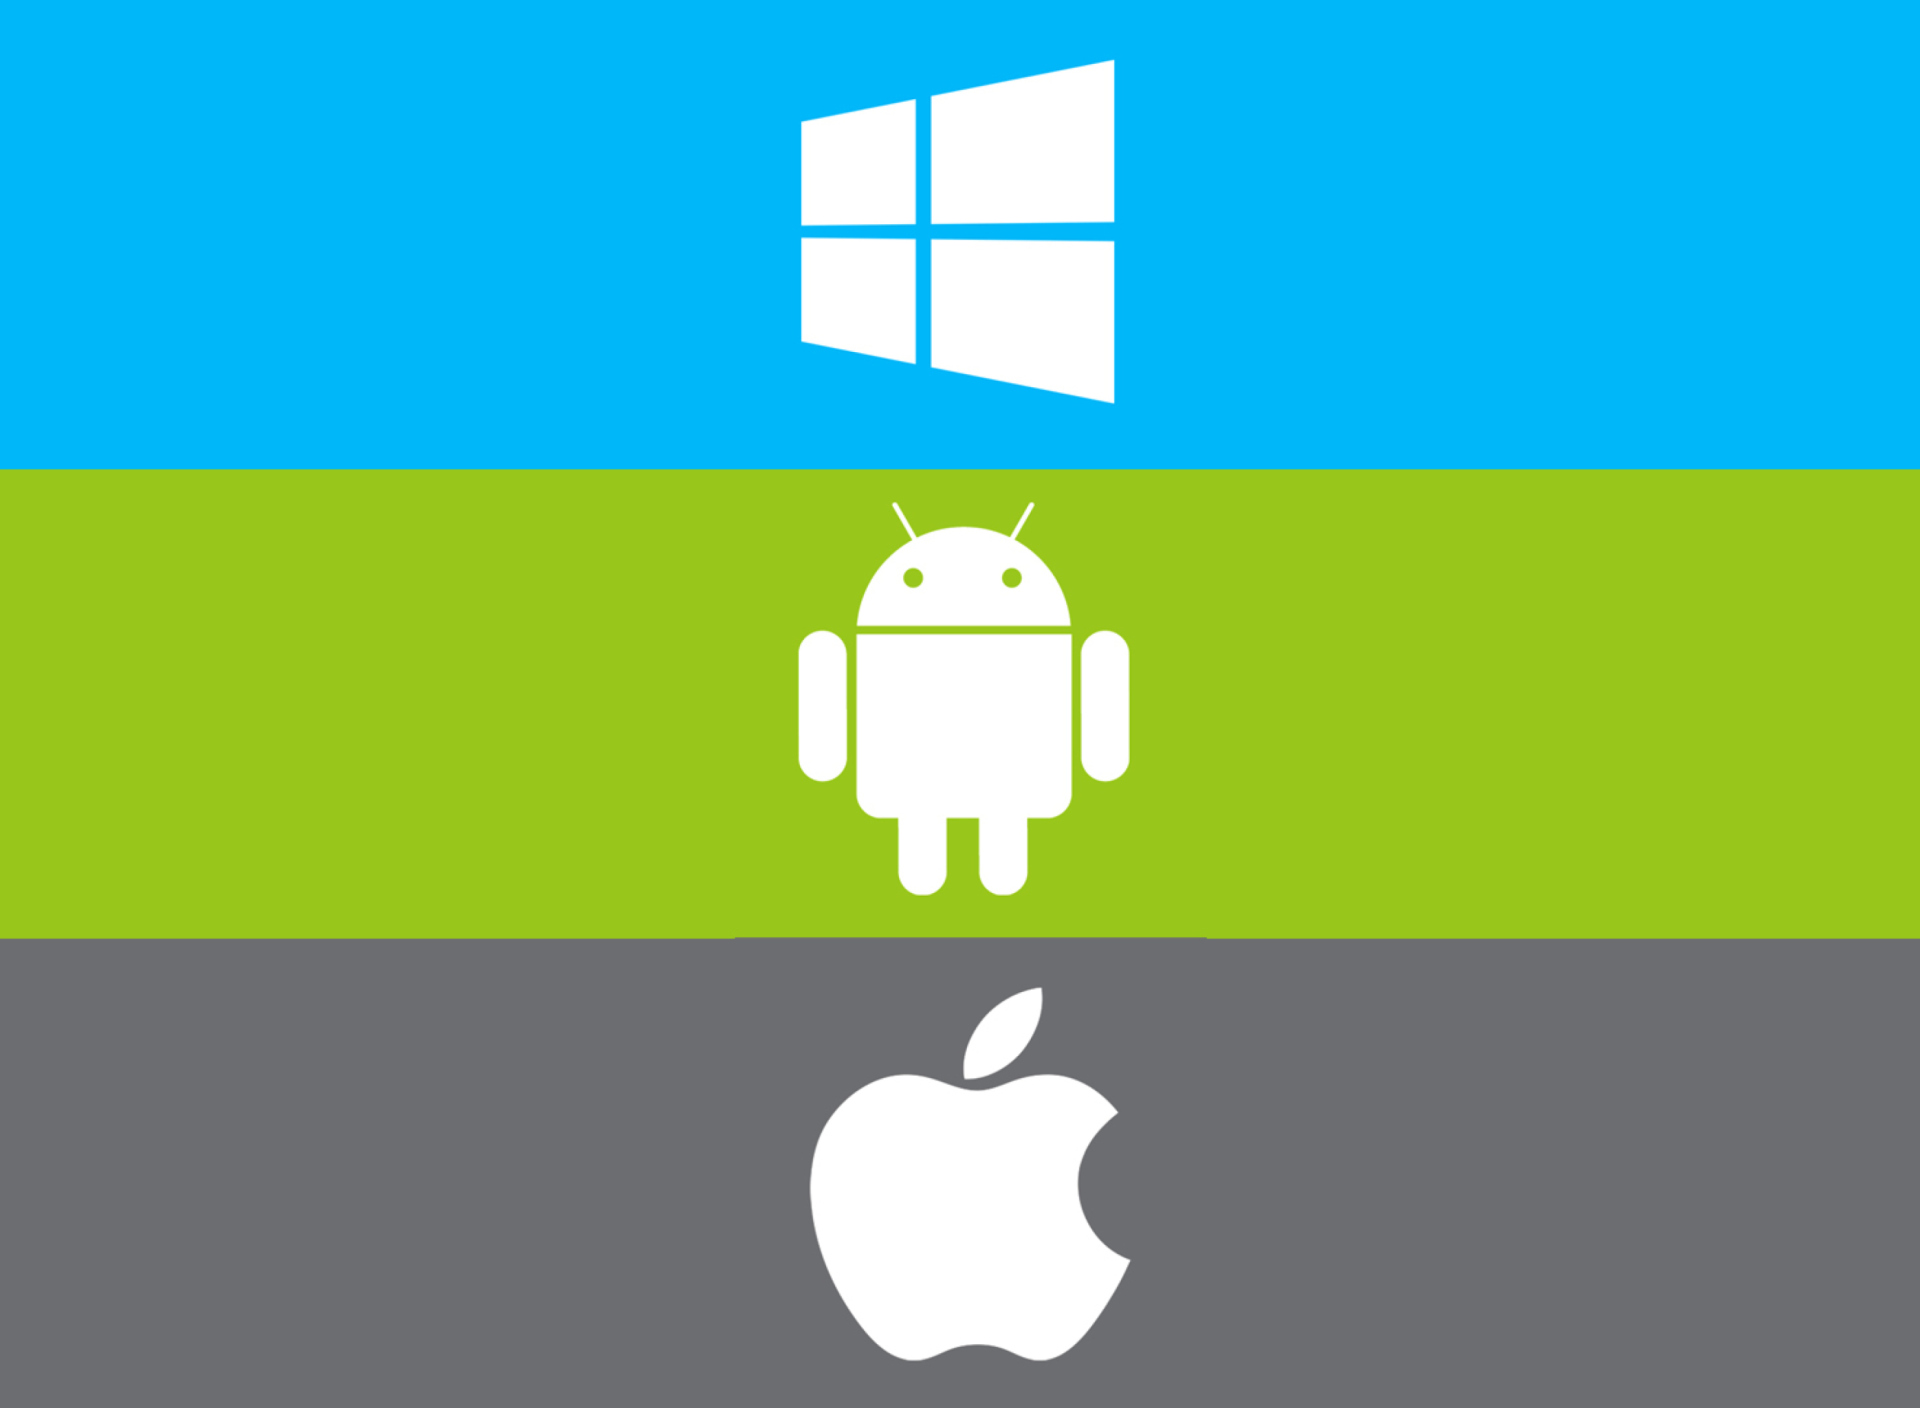 Windows, Apple, Android - What's Your Choice? wallpaper 1920x1408